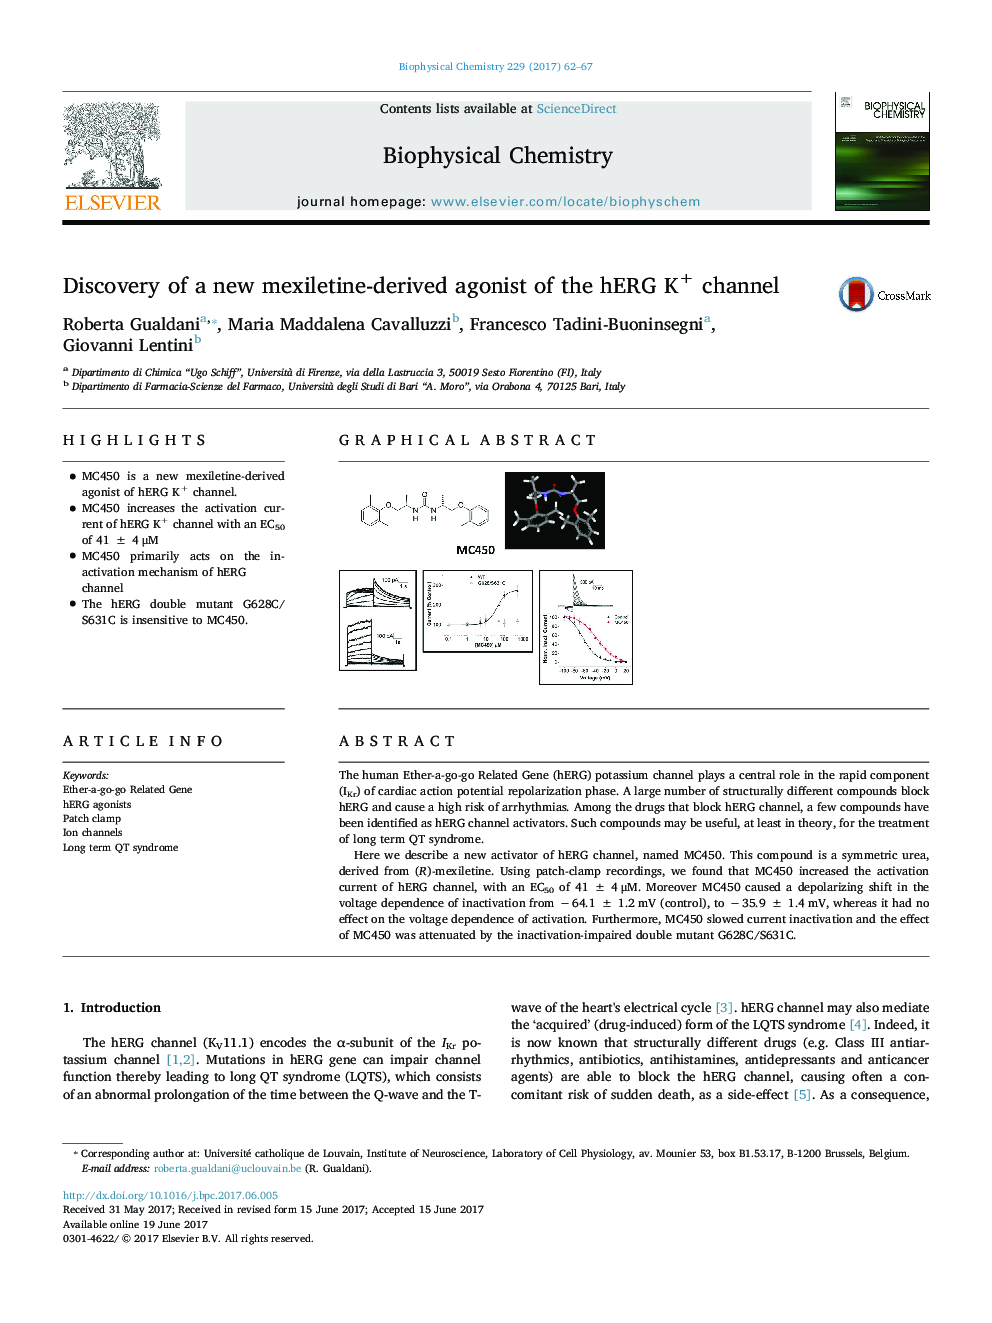 Discovery of a new mexiletine-derived agonist of the hERG K+ channel